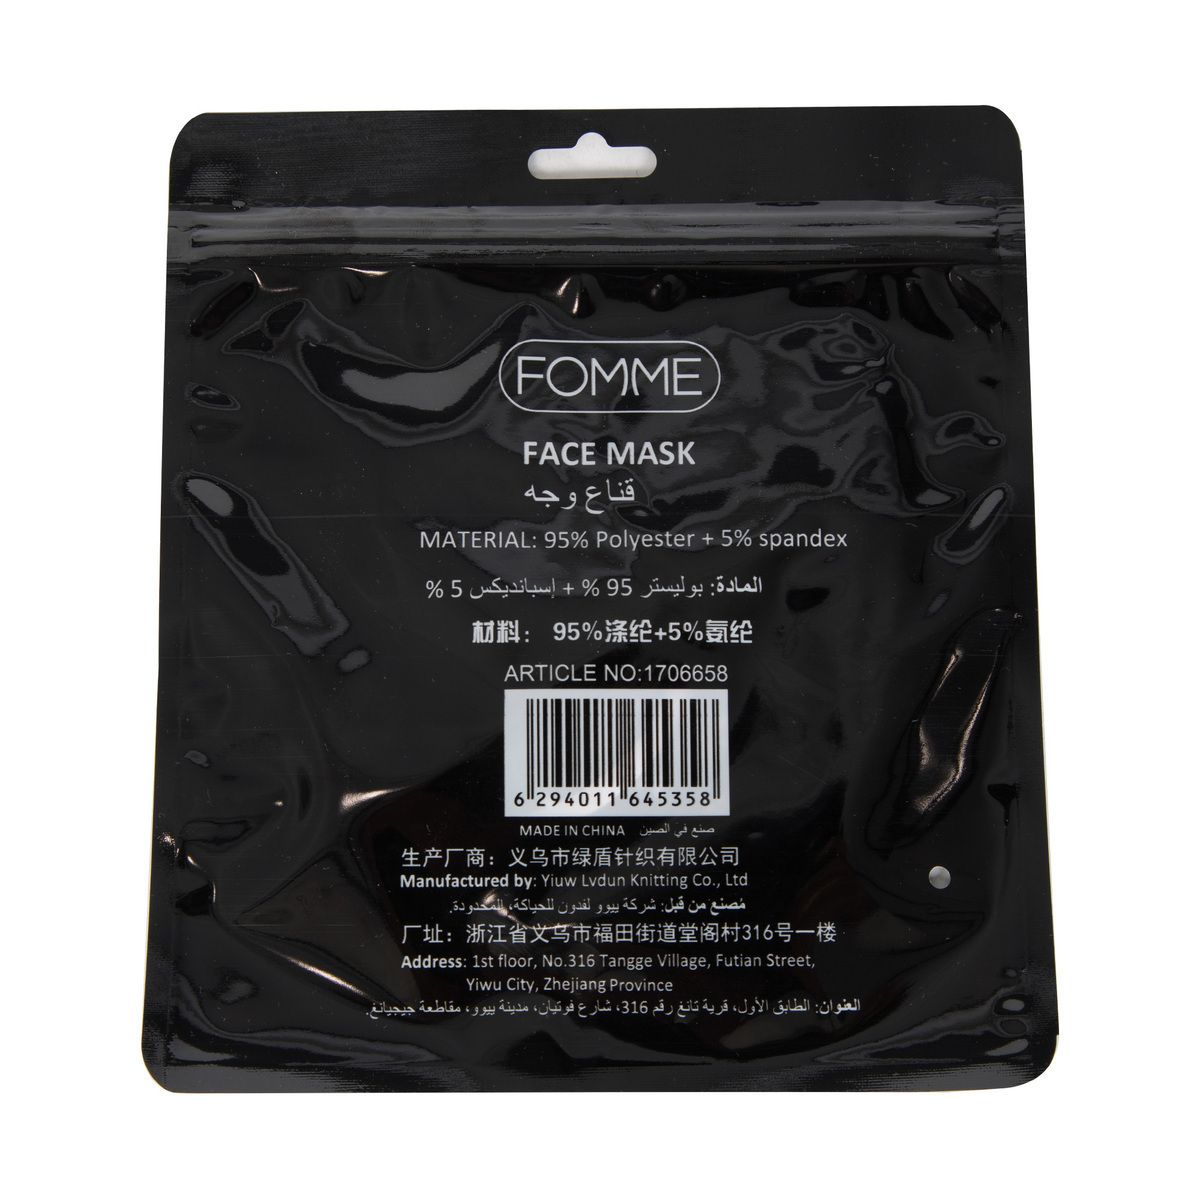 Fomme Face Mask MG-5 Assorted 1pc